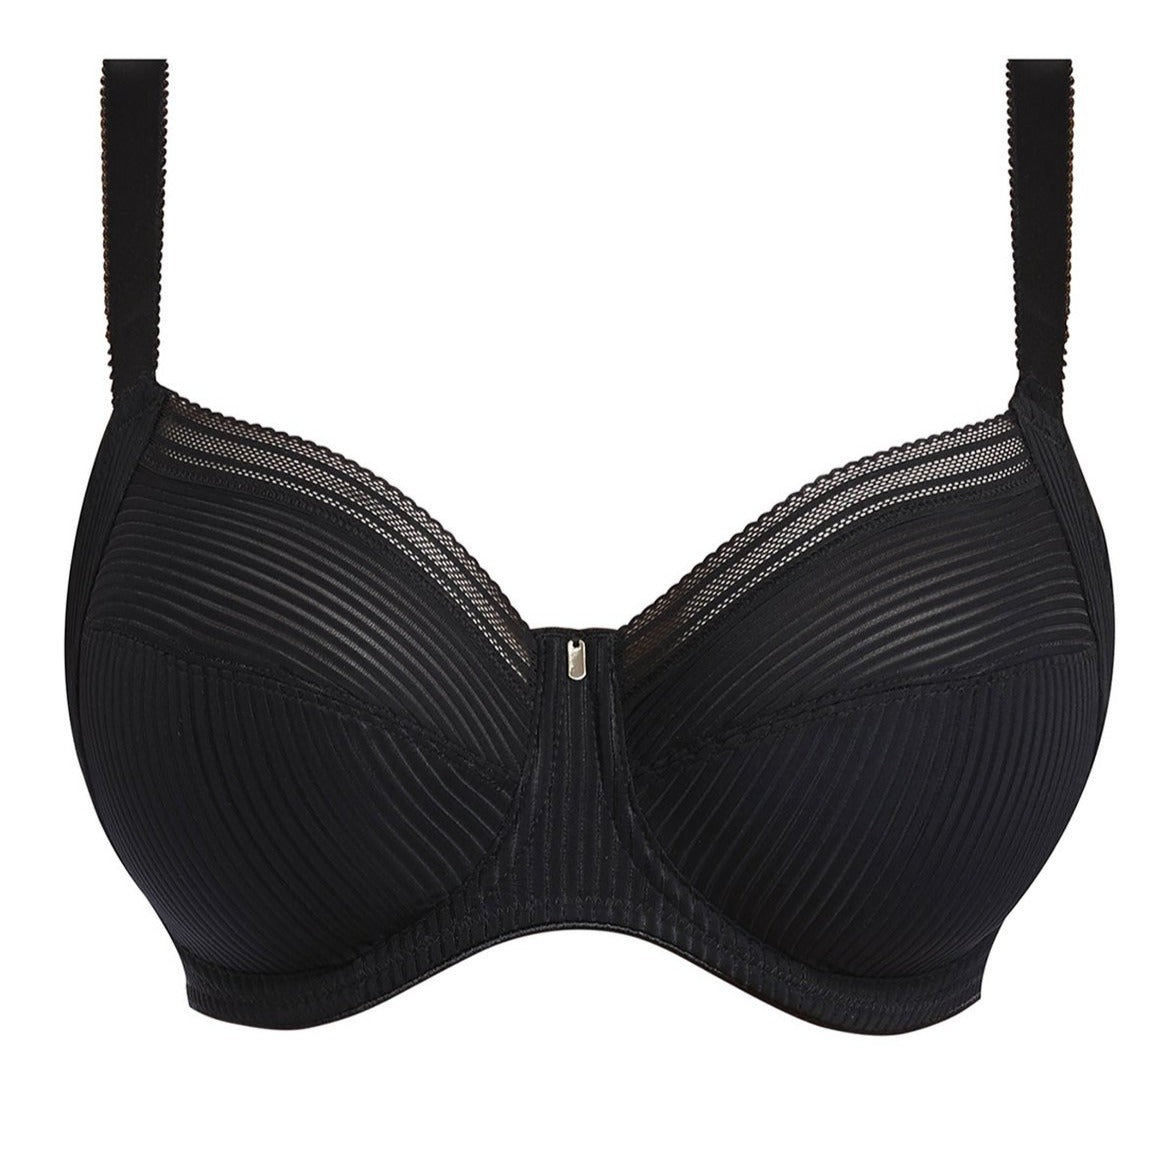 Fantasie Fusion Full Cup Side Support Bra: Coffee Roast : 32E